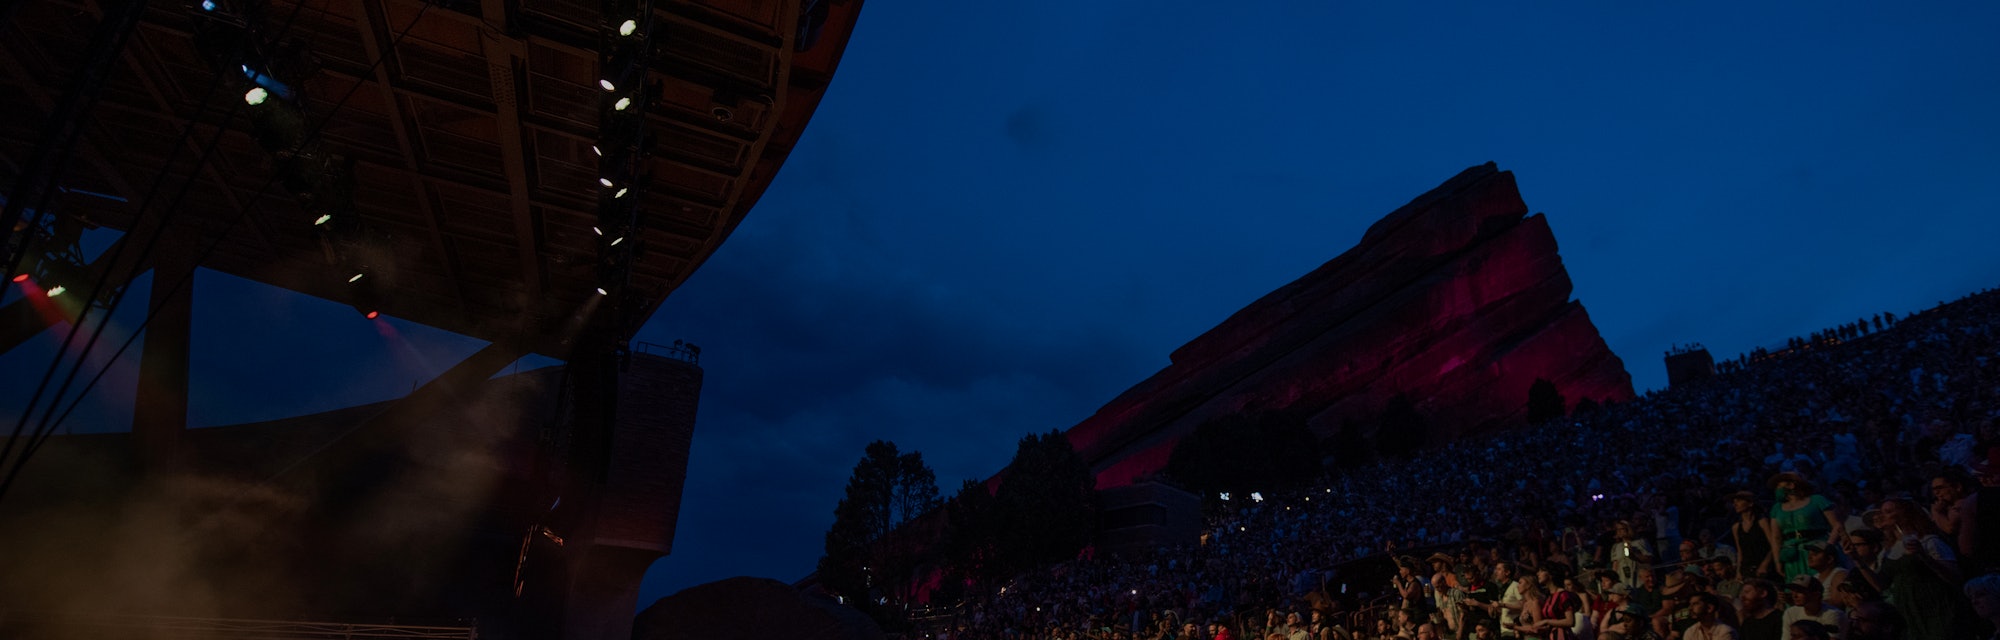 MORRISON, COLORADO - JULY 22: Musician Yola opens for Orville Peck Summertime Tour at Red Rocks Amph...